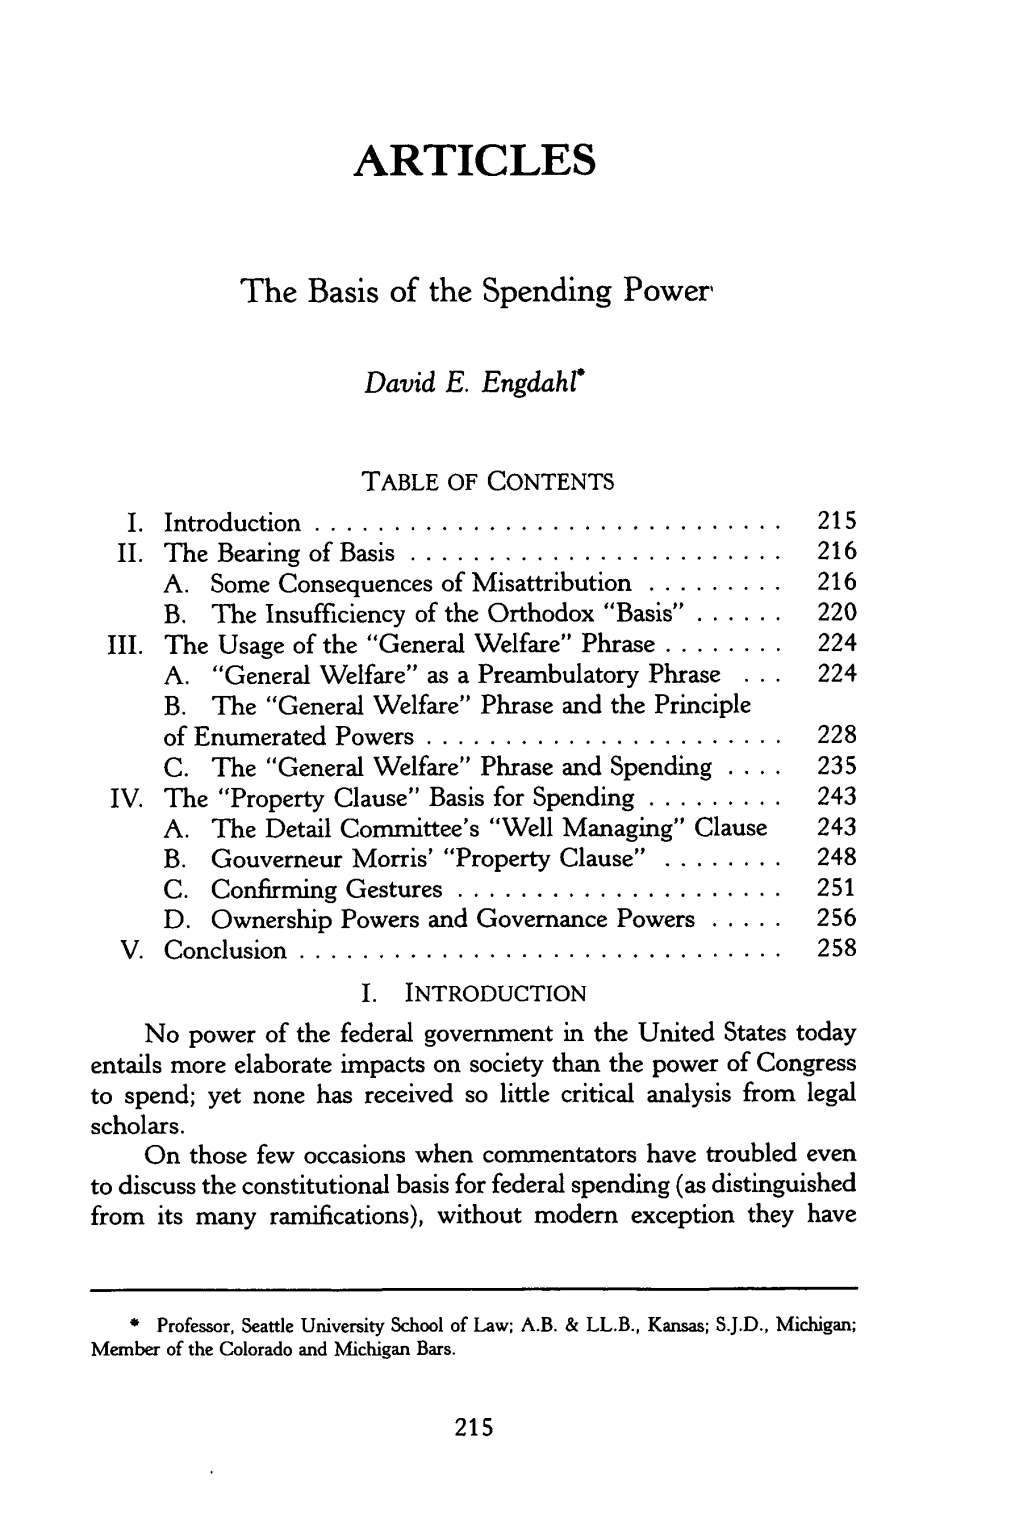 The Basis of the Spending Power